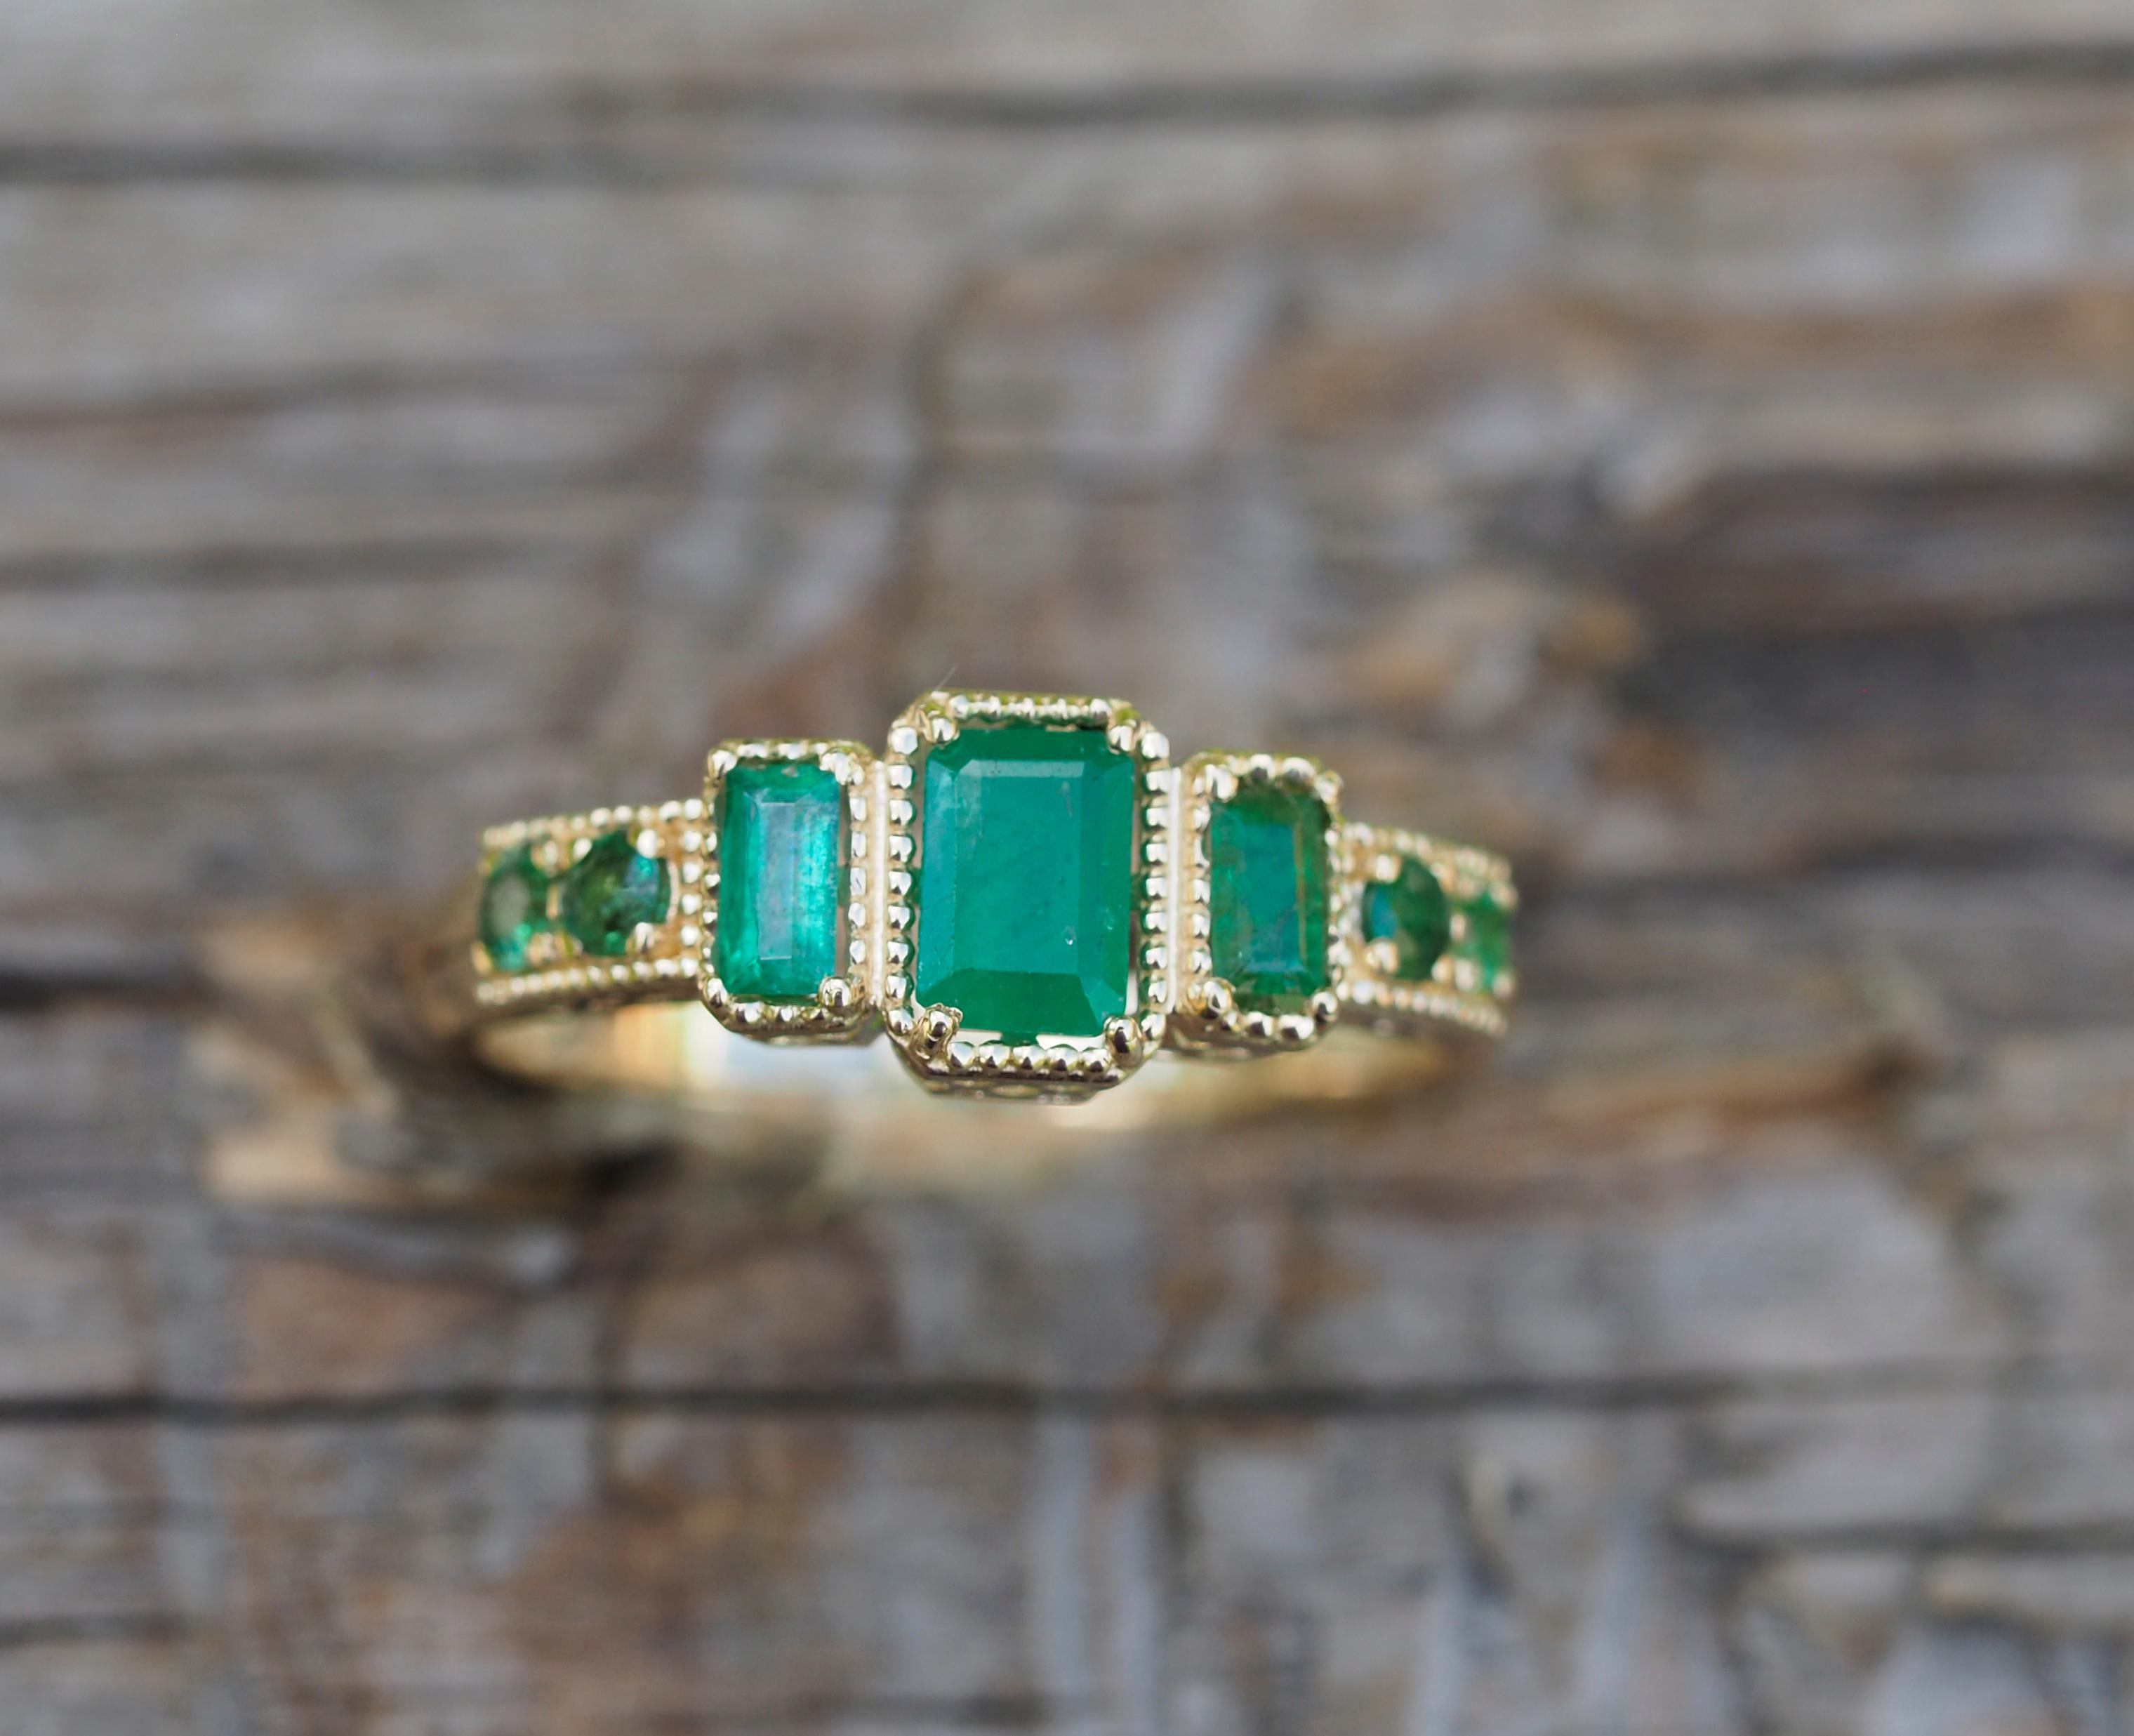 Emerald 14k gold ring. 
3 stone emerald ring. Emerald Vintage ring. Emerald engagement ring. Emerald trilogy ring. Delicate emerald ring.

MeTAL: 14k gold
Weight: 2.50 g. depends from size.

Gemstones (all are natural and tested by proffesional